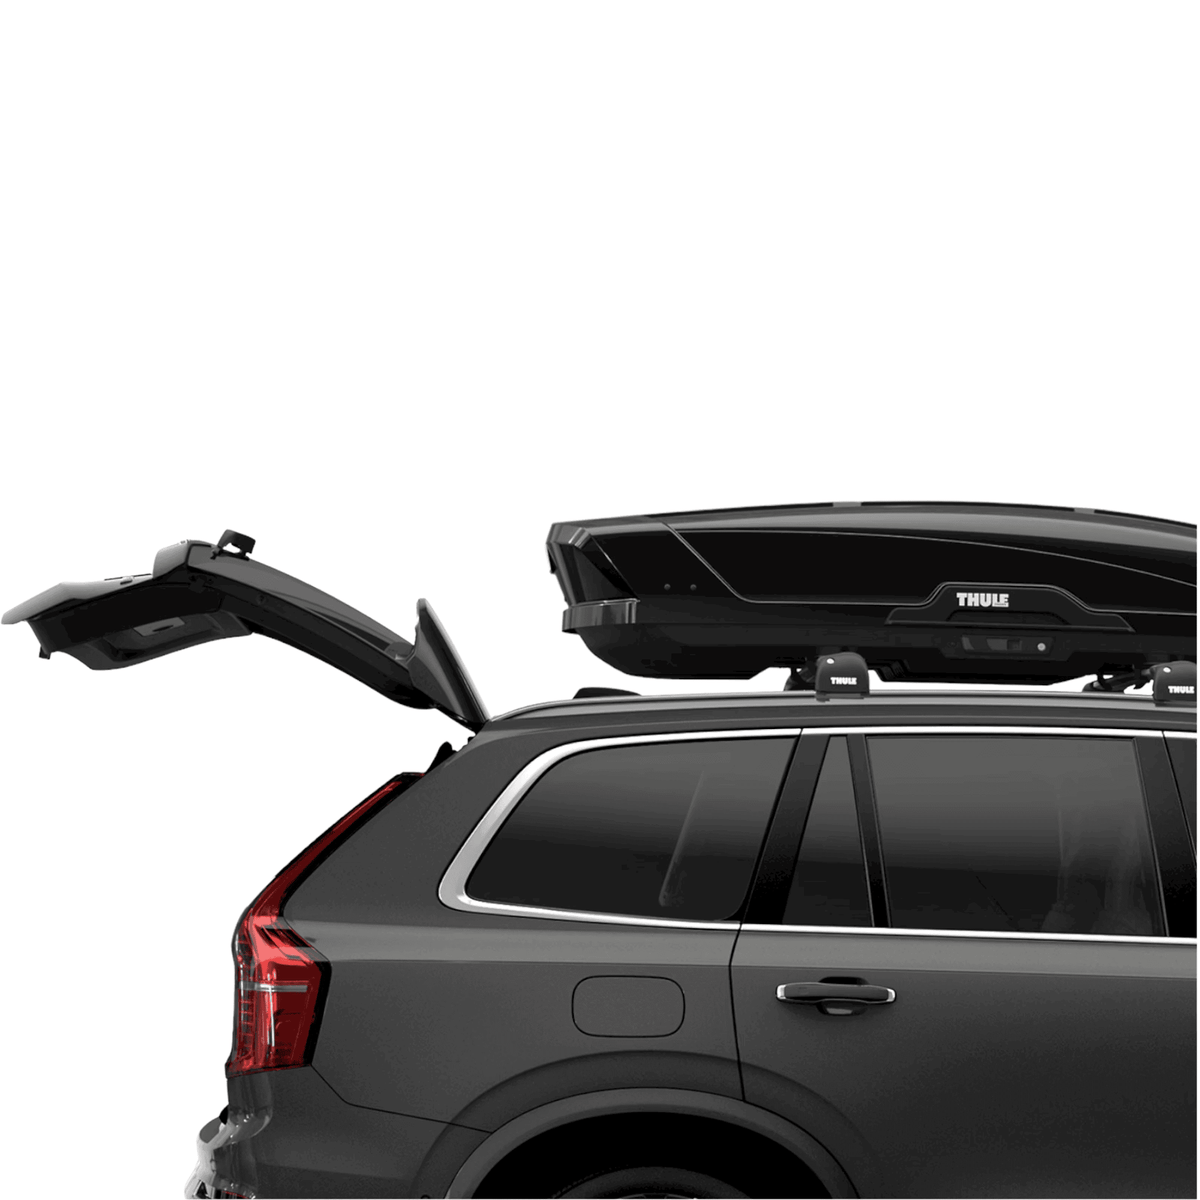 Thule Roof Box for Motion XT Alpine Skis – Oberson